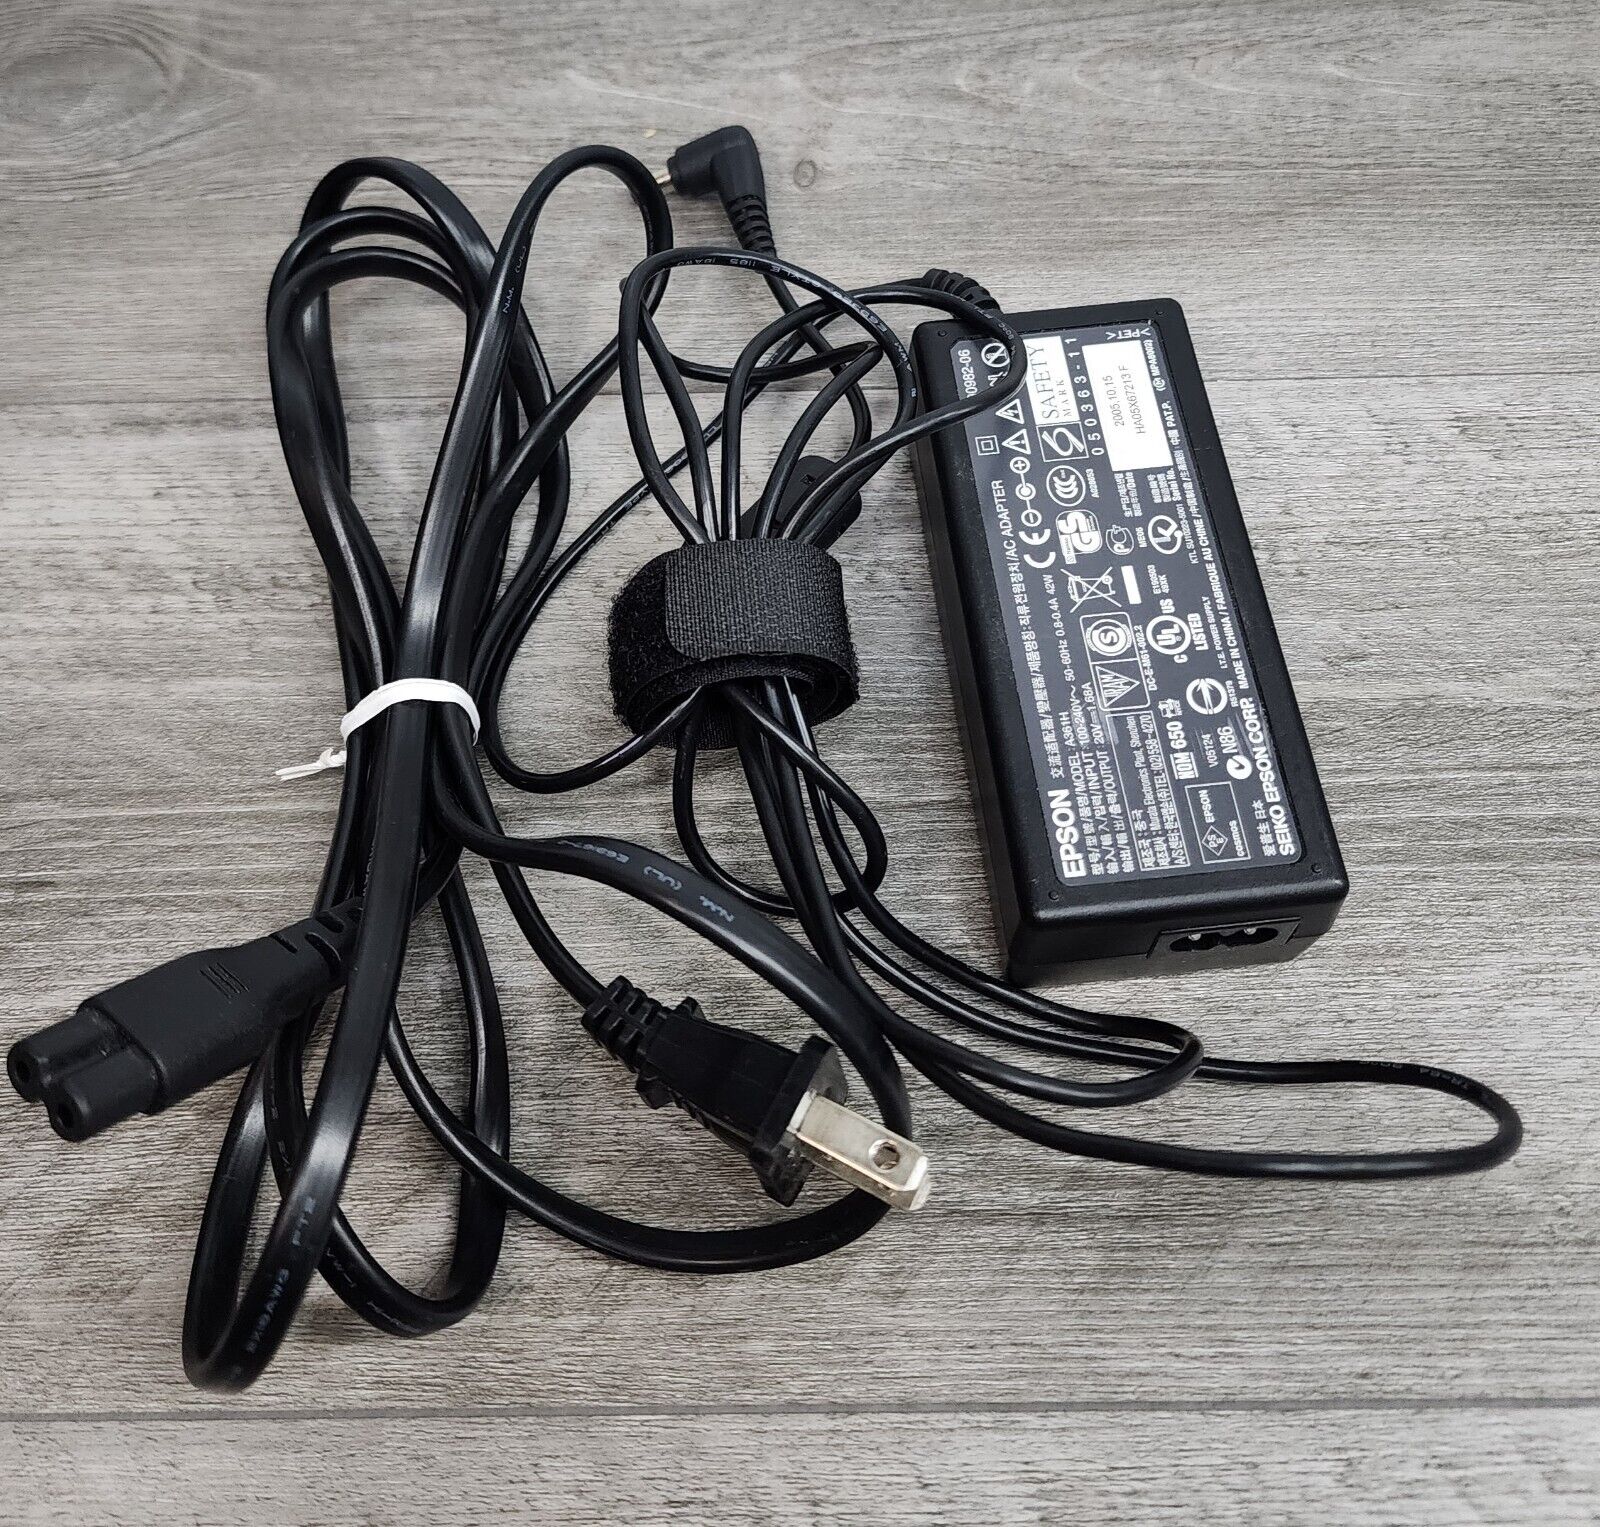 Genuine Epson A361H AC Adapter w/Power Cord for PictureMate Printers OEM